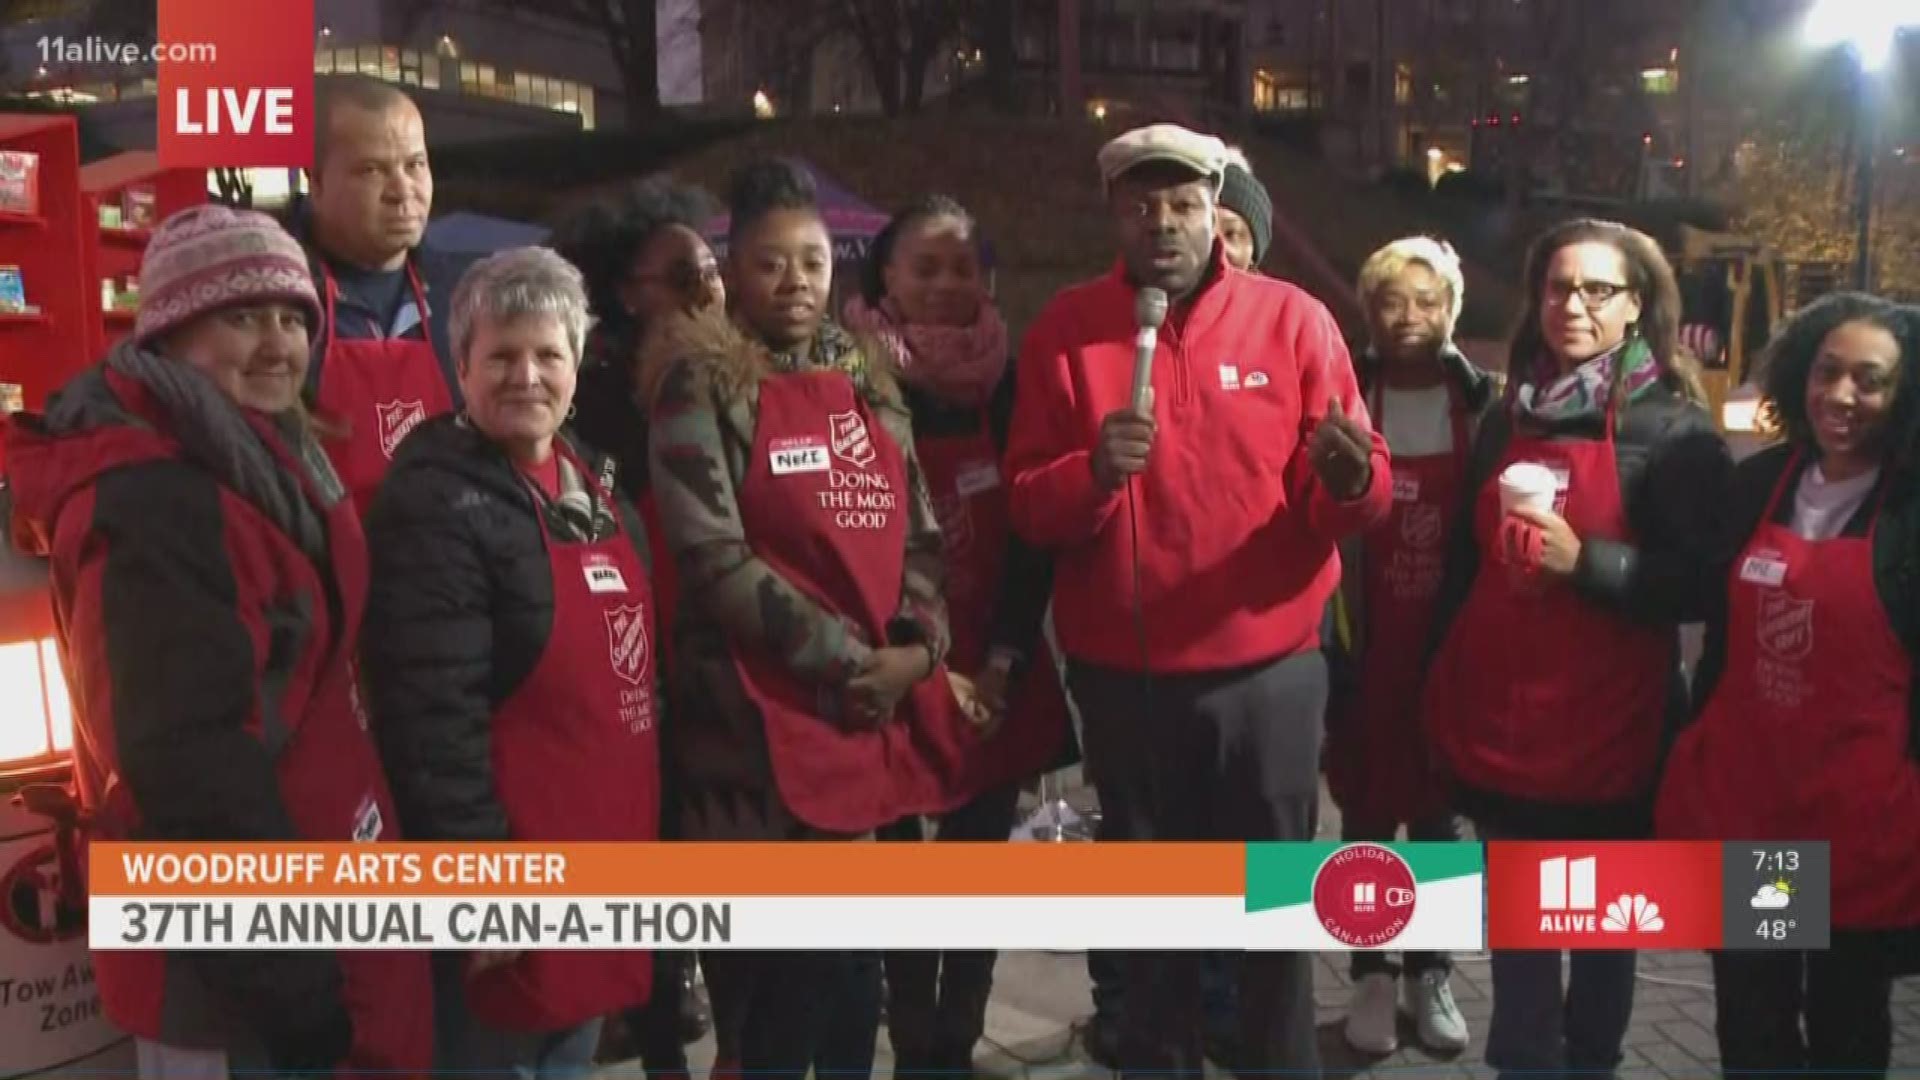 Today is the 37th annual Can-A-Thon! We're looking to collect 300,000 cans today!